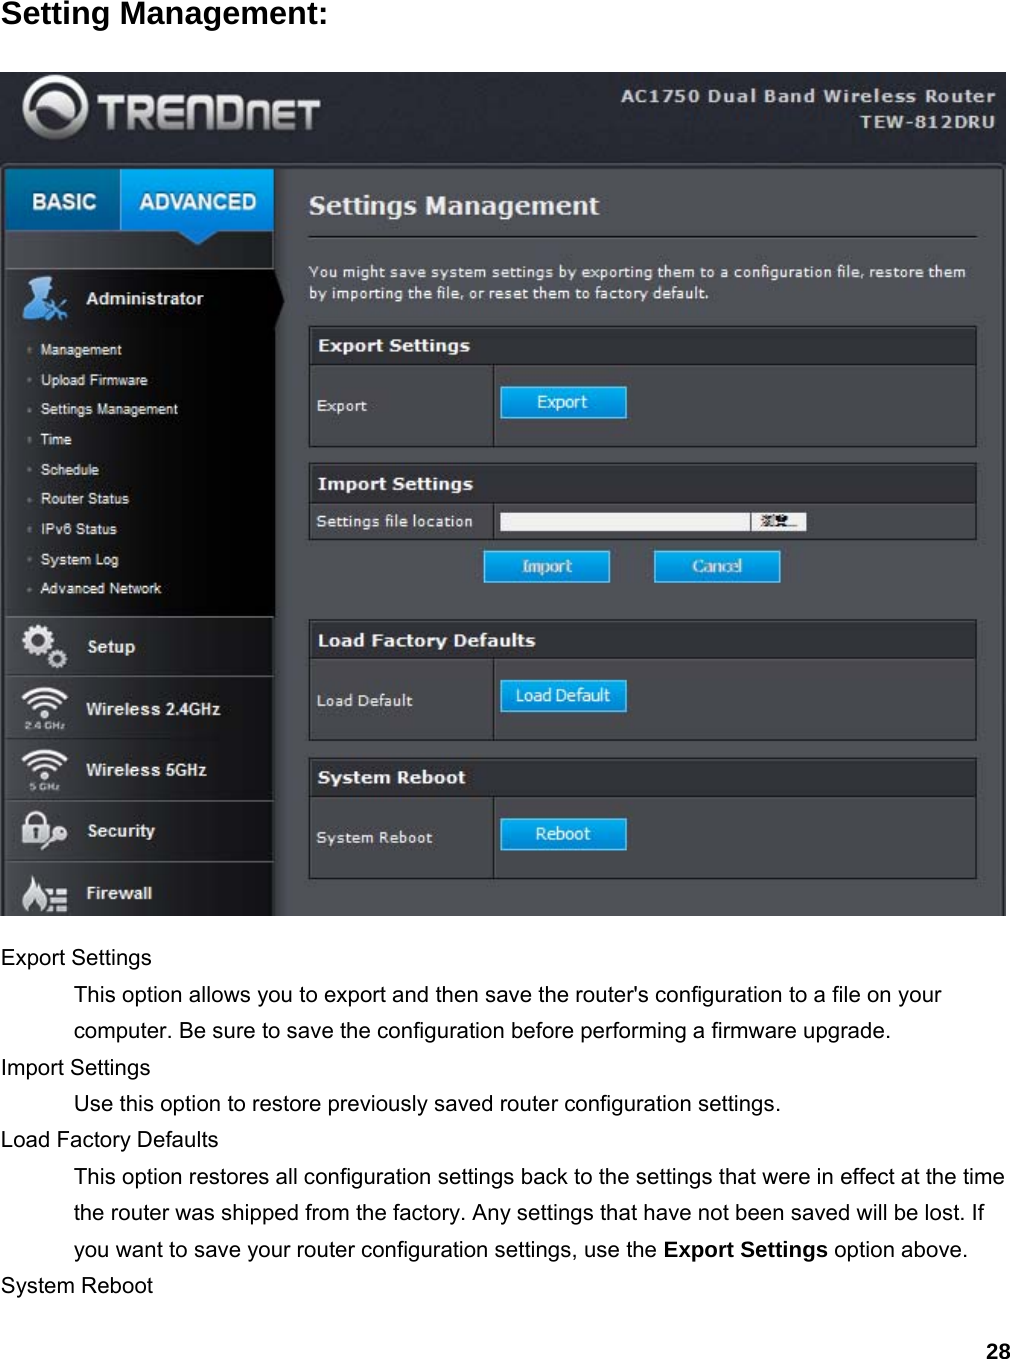 28 Setting Management:  Export Settings   This option allows you to export and then save the router&apos;s configuration to a file on your computer. Be sure to save the configuration before performing a firmware upgrade.   Import Settings   Use this option to restore previously saved router configuration settings.   Load Factory Defaults   This option restores all configuration settings back to the settings that were in effect at the time the router was shipped from the factory. Any settings that have not been saved will be lost. If you want to save your router configuration settings, use the Export Settings option above.   System Reboot   